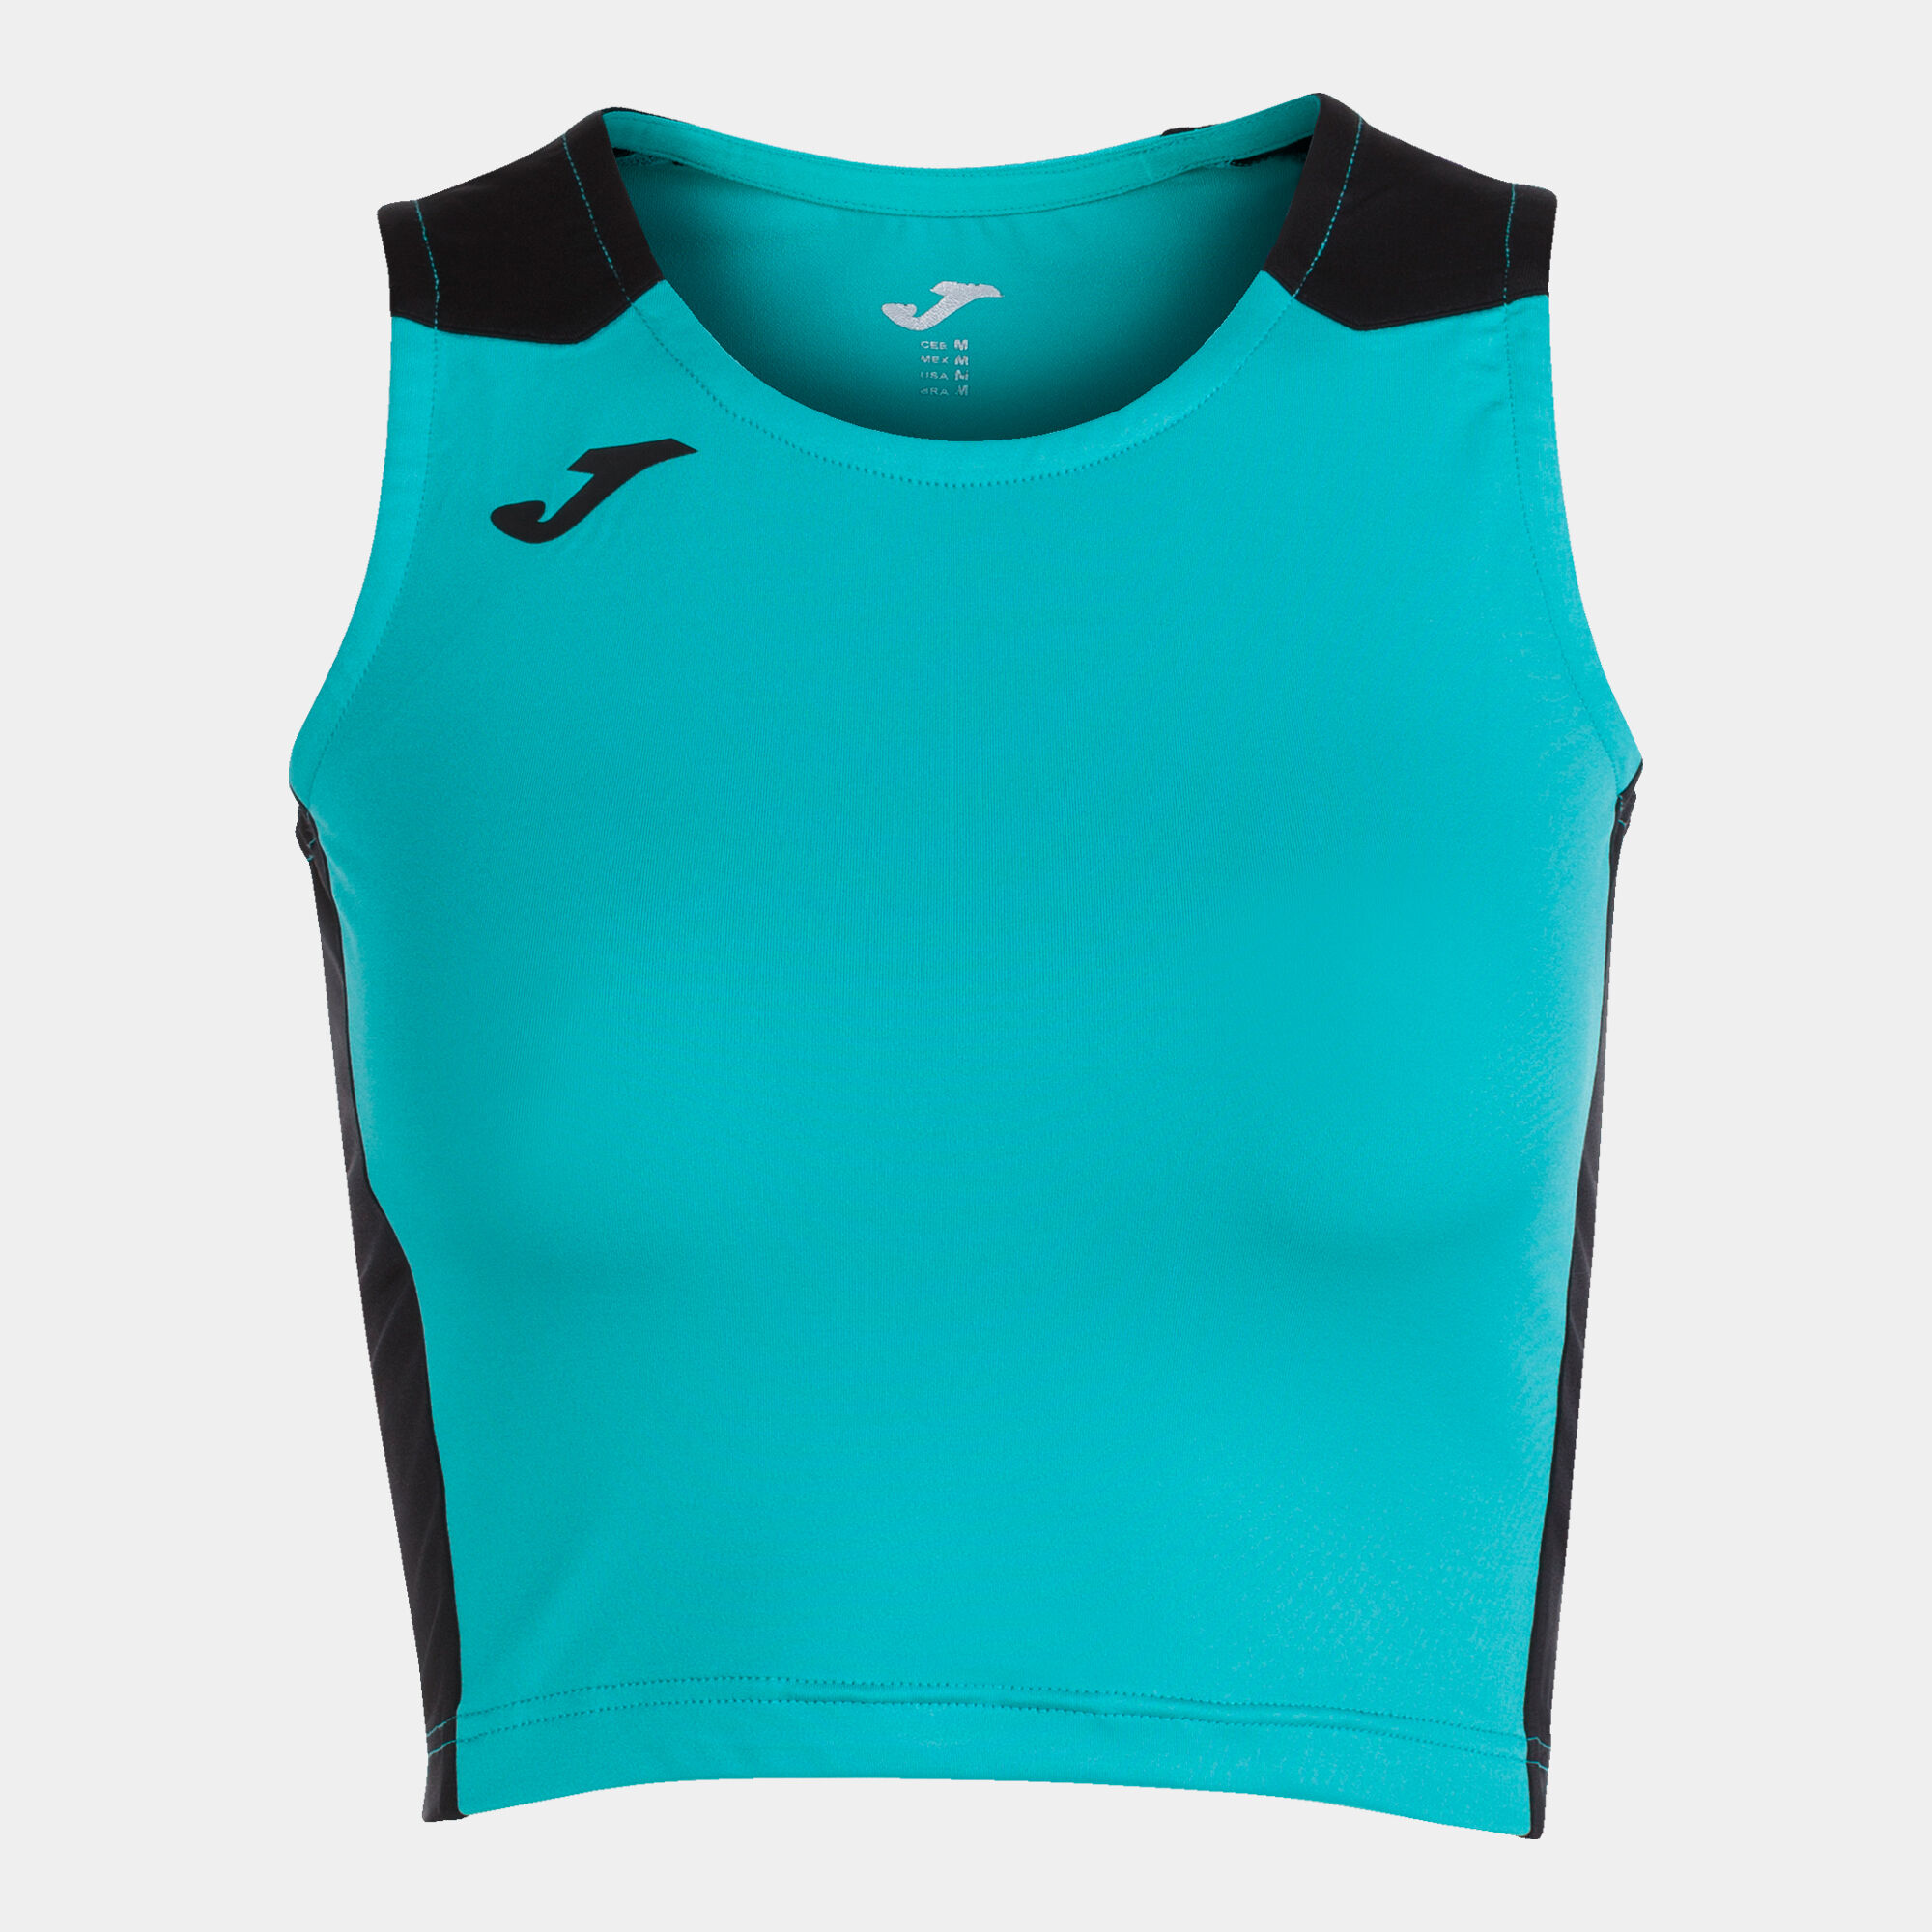 Top femme Record II turquoise noir